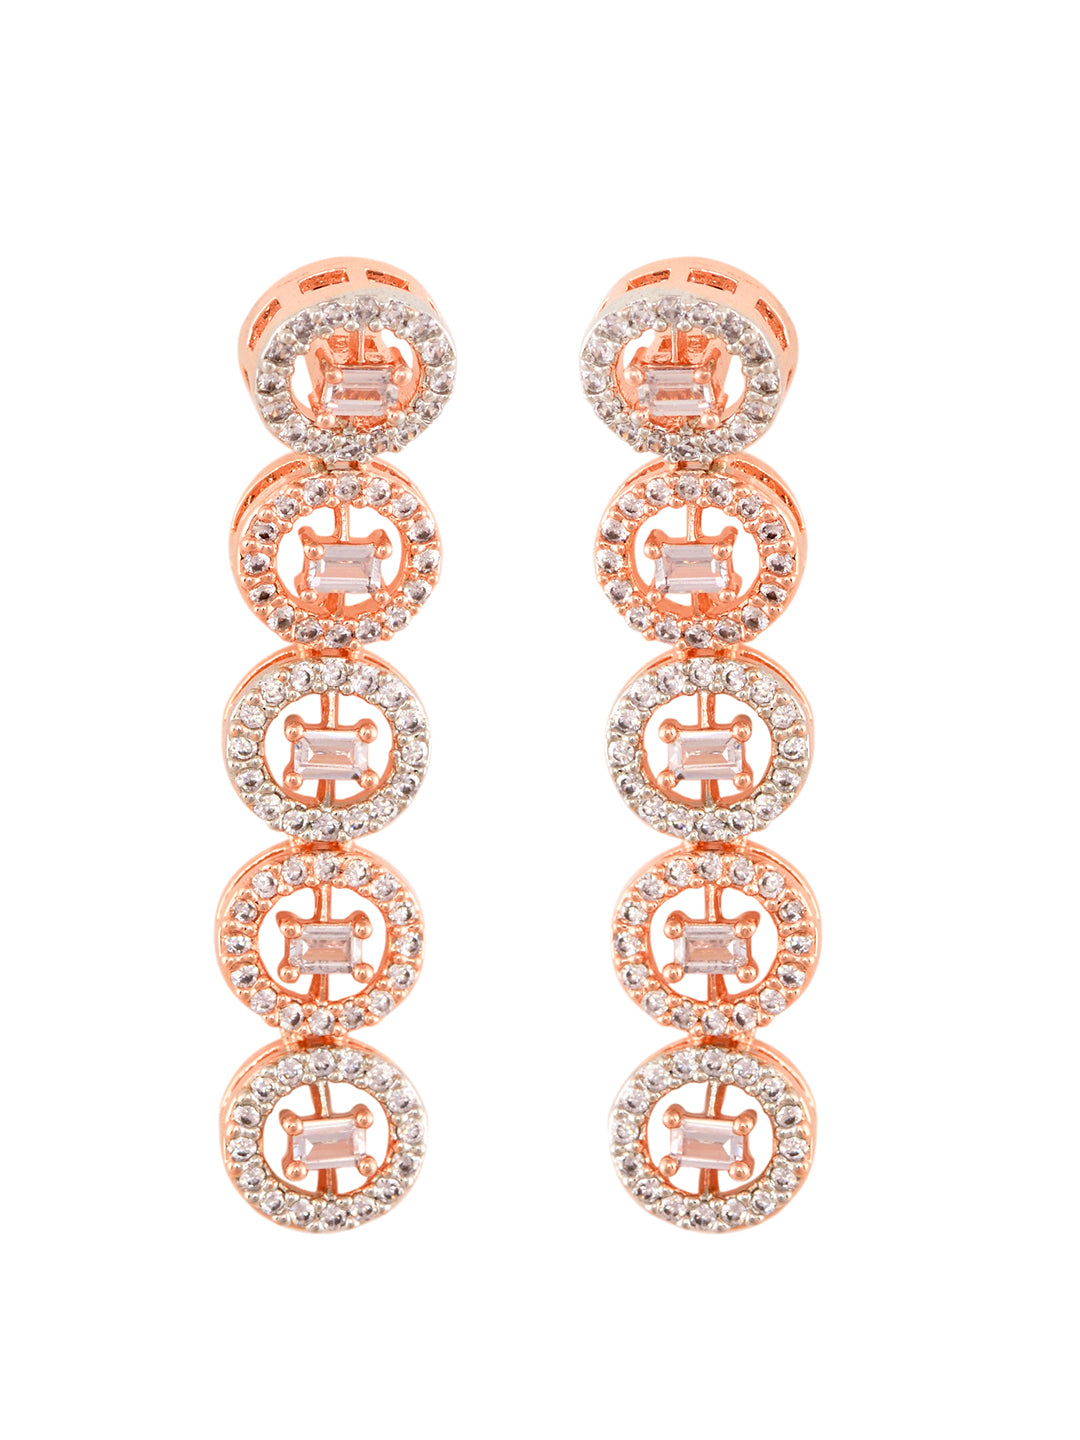 Rose Gold Plated White AD Studded Handcrafted Contemporary Jewellery Set Dropdown Earrings, zaveri pearls, sale price rs, sale price, sale gold plated, sale gold, sale, rubans, ring, regular 